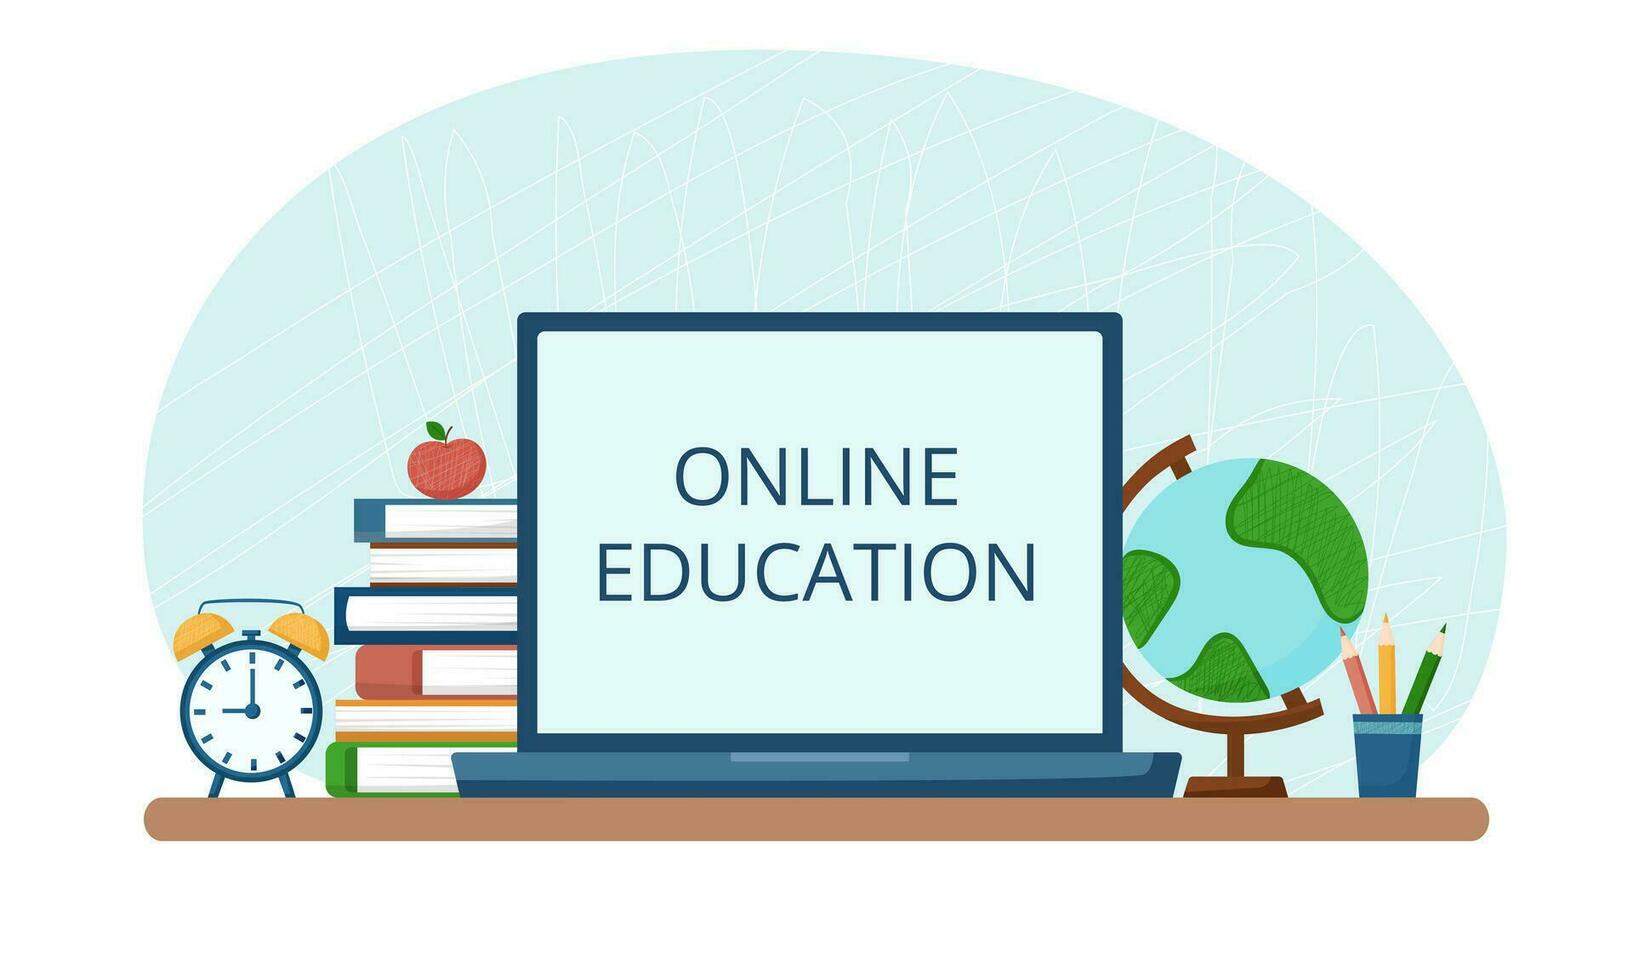 Online education background vector